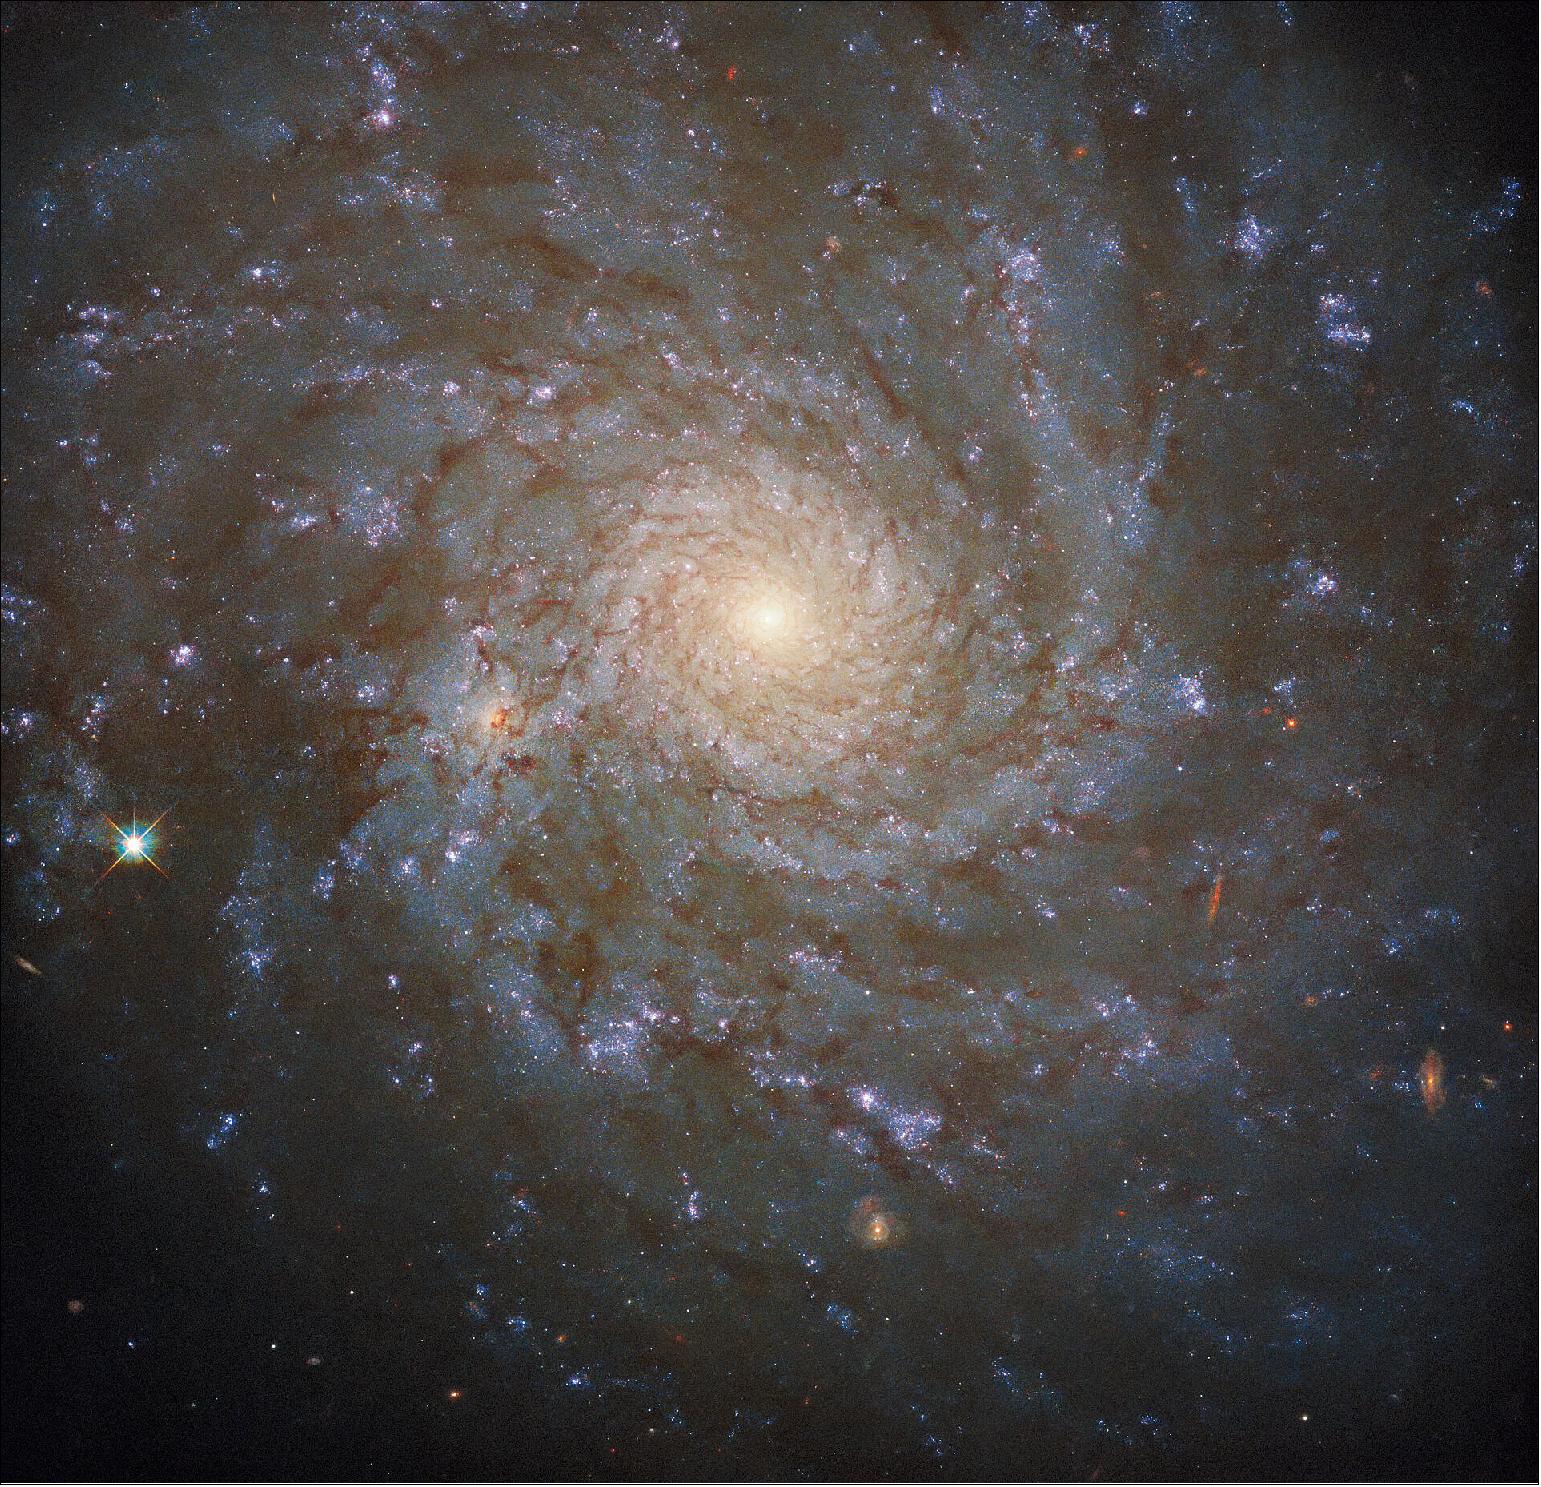 Figure 65: This image comes from a large programme of observations designed to produce a treasure trove of combined observations from two great observatories: Hubble and ALMA. ALMA, The Atacama Large Millimeter/submillimeter Array, is a vast telescope consisting of 66 high-precision antennas high in the Chilean Andes, which together observe at wavelengths between infrared and radio waves. This allows ALMA to detect the clouds of cool interstellar dust which give rise to new stars. Hubble’s razor-sharp observations at ultraviolet wavelengths, meanwhile, allows astronomers to pinpoint the location of hot, luminous, newly formed stars. Together, the ALMA and Hubble observations provide a vital repository of data to astronomers studying star formation, as well as laying the groundwork for future science with the NASA/ESA/CSA James Webb Space Telescope (image credit: ESA/Hubble & NASA, J. Lee and the PHANGS-HST Team; CC BY 4.0)